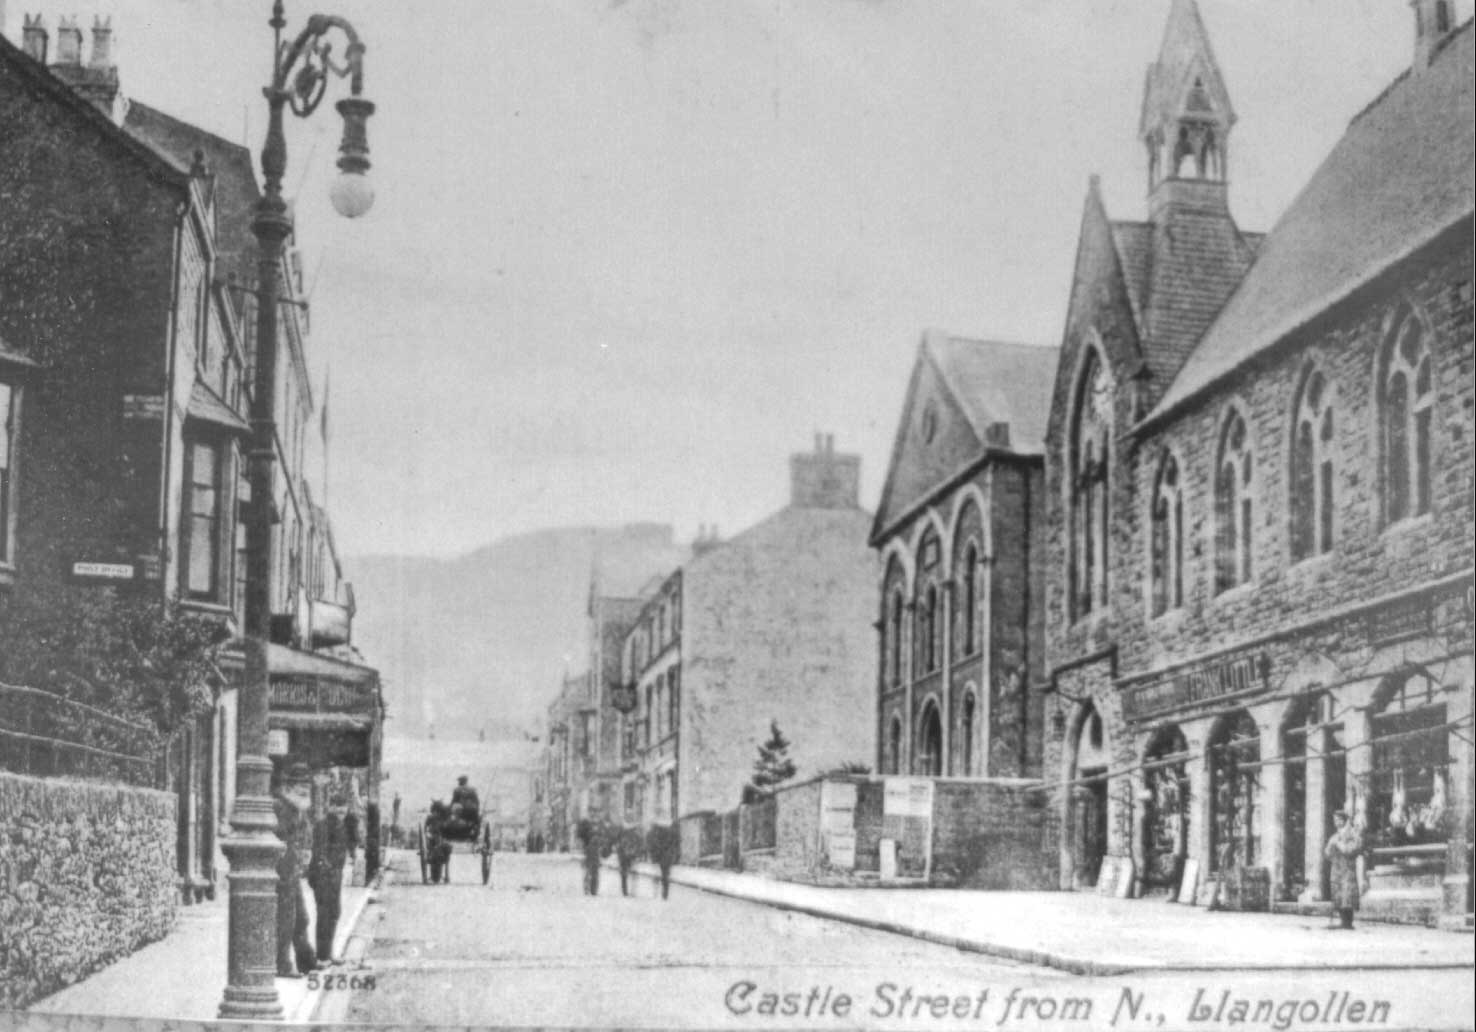 Castle Street with Capel